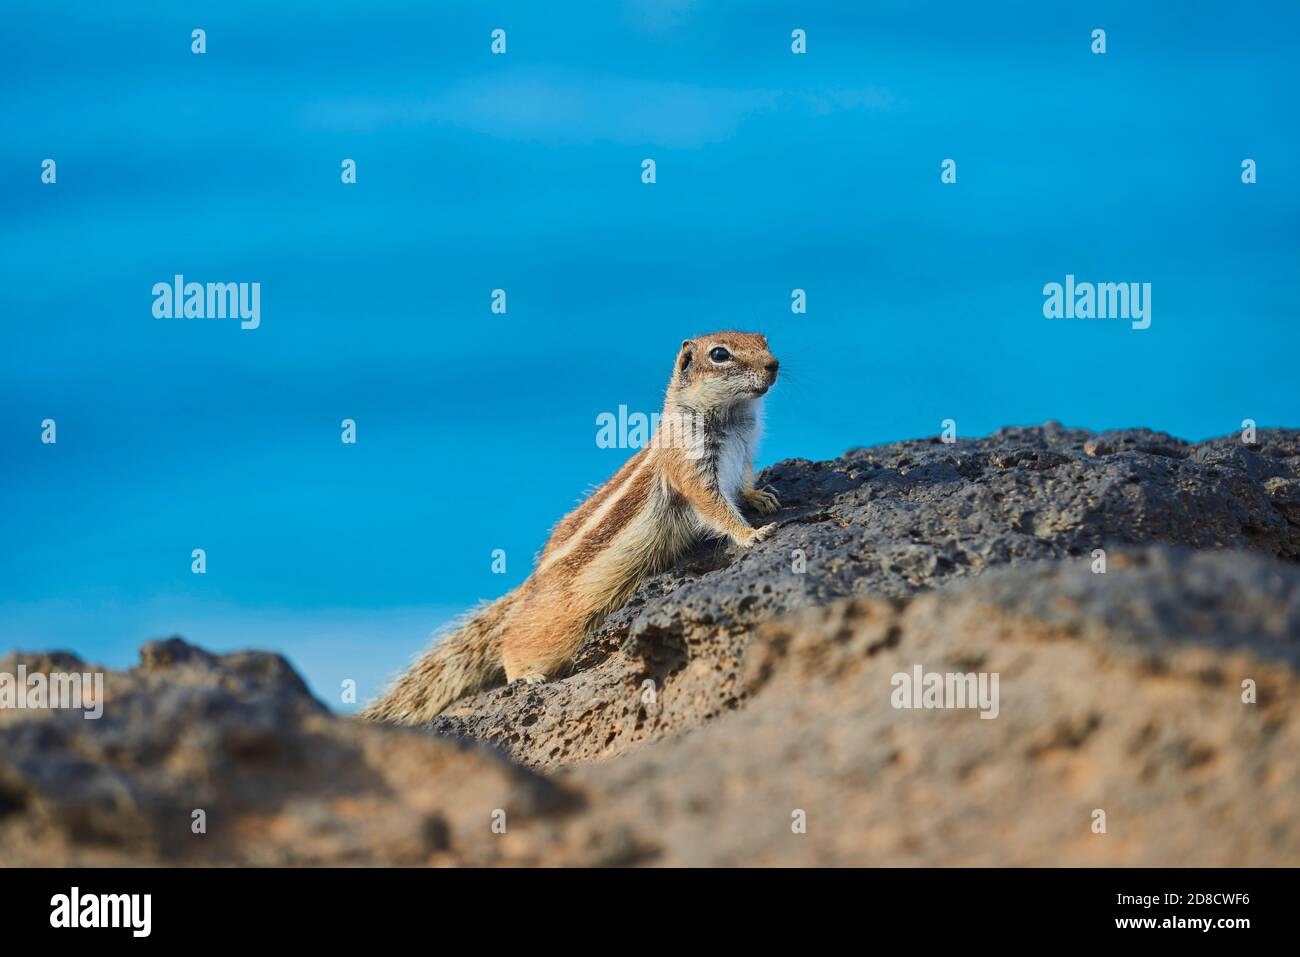 barbary ground squirrel, North African ground squirrel (Atlantoxerus getulus), staying on a lava stone, side view, Canary Islands, Fuerteventura Stock Photo